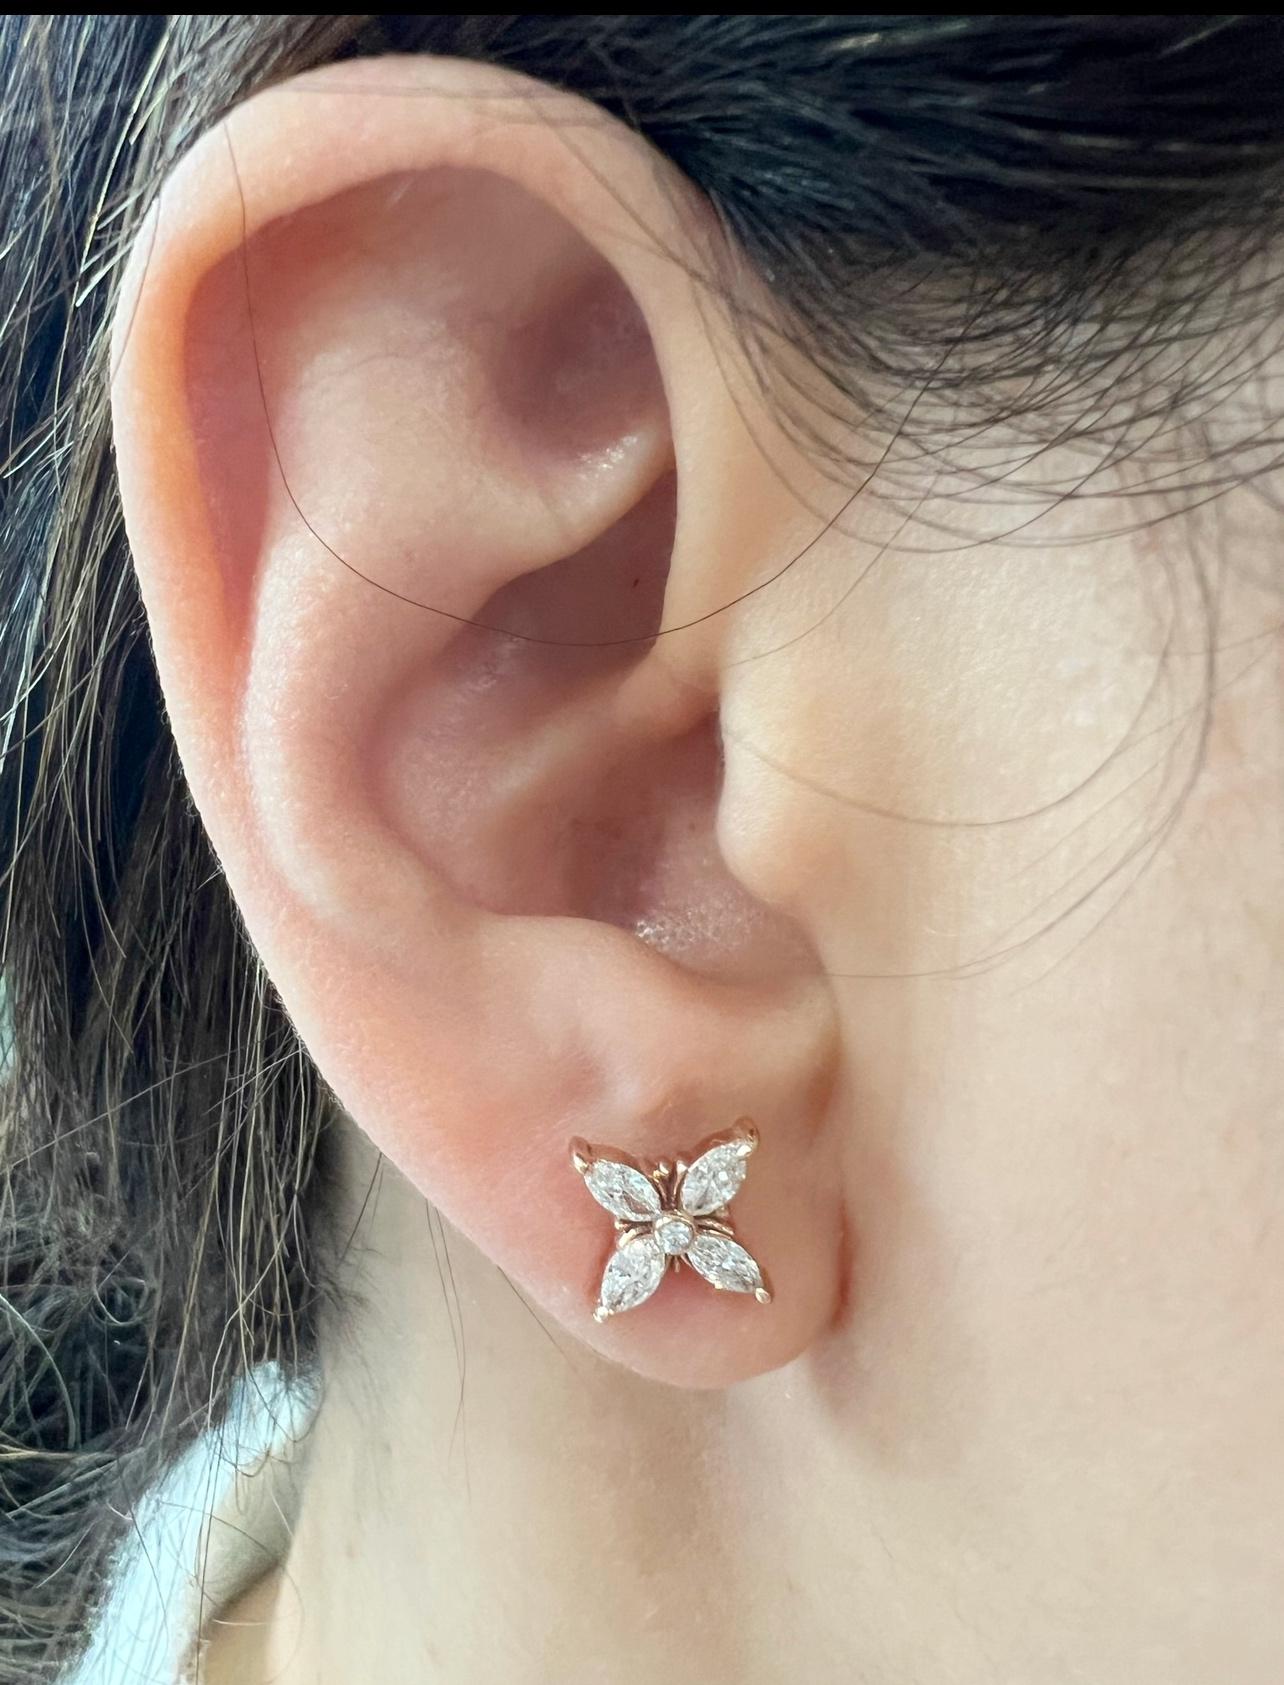 Crafted in 14K gold, this stunning minimalist floral stud earring features marquise-cut diamonds as its pedals and is centered with a round shimmering diamond. These earrings are the staple piece for your daily look and the perfect gift for any